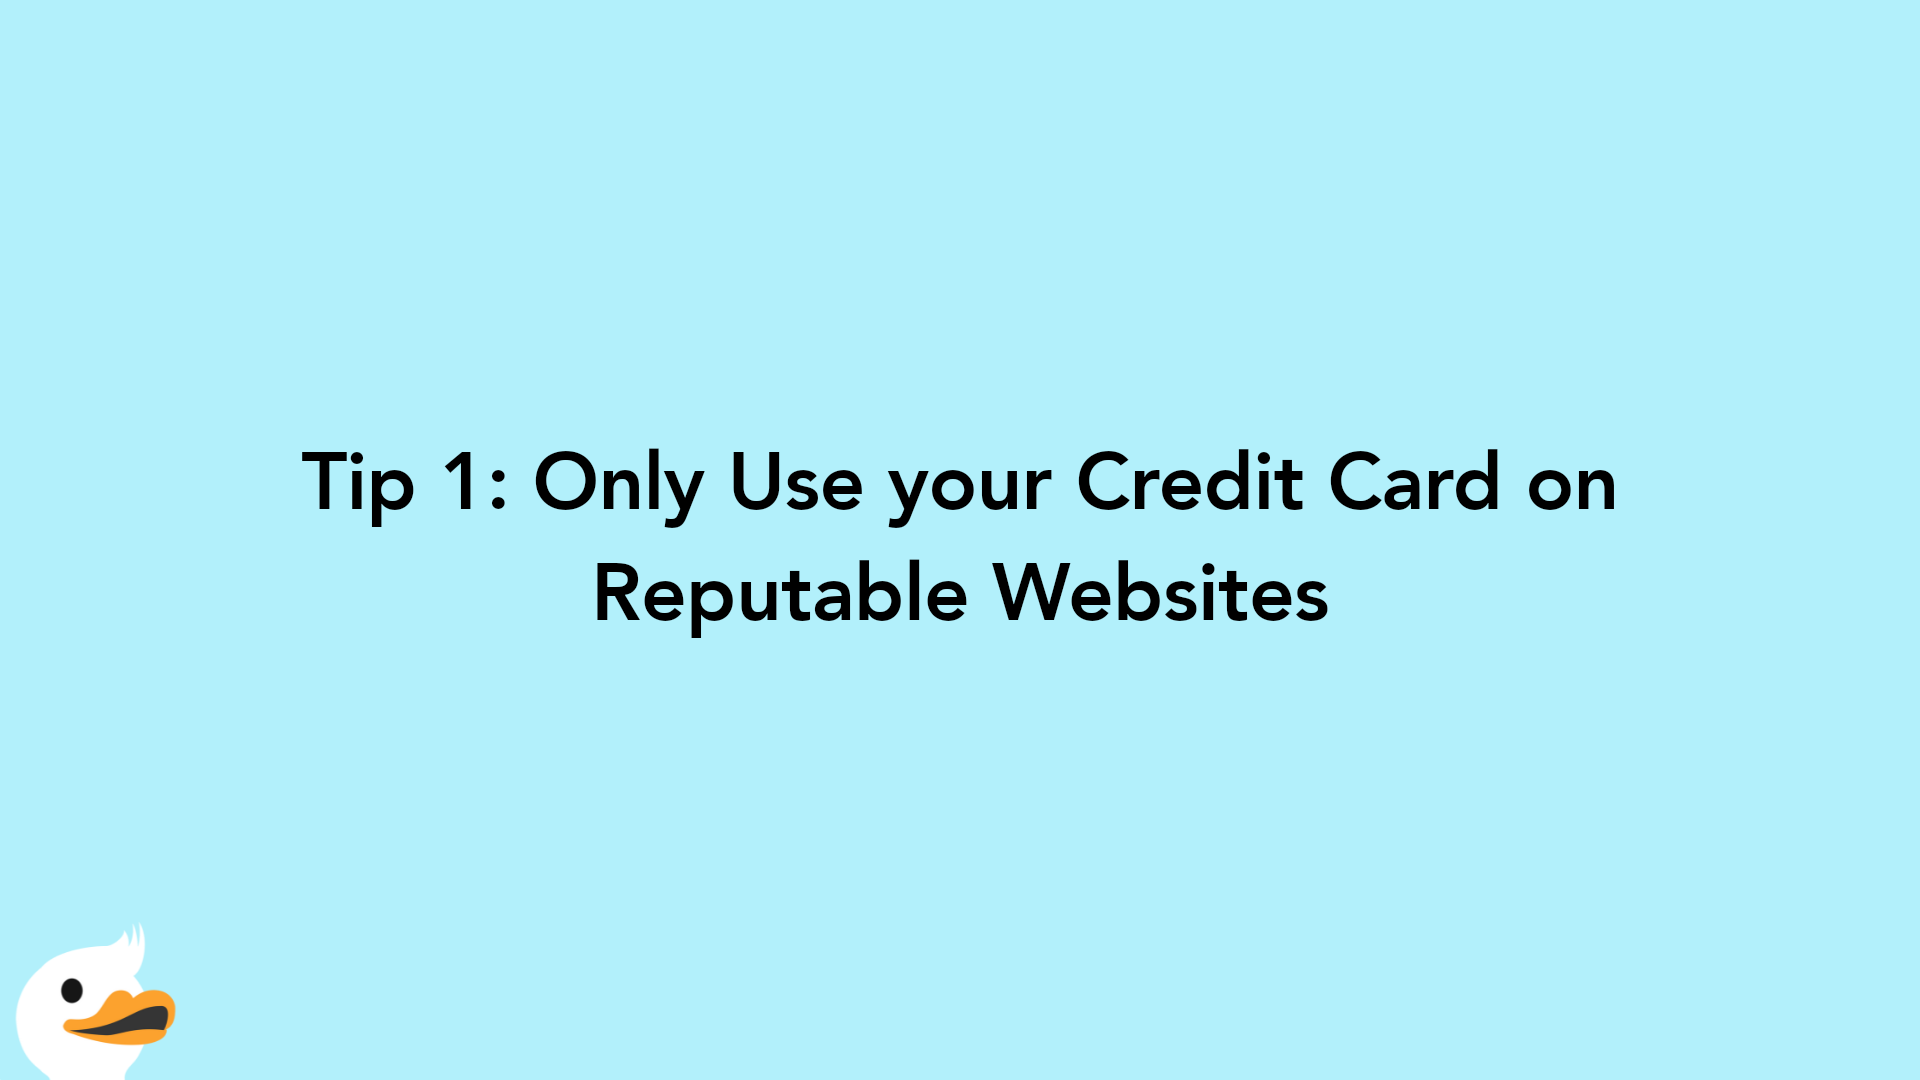 Tip 1: Only Use your Credit Card on Reputable Websites